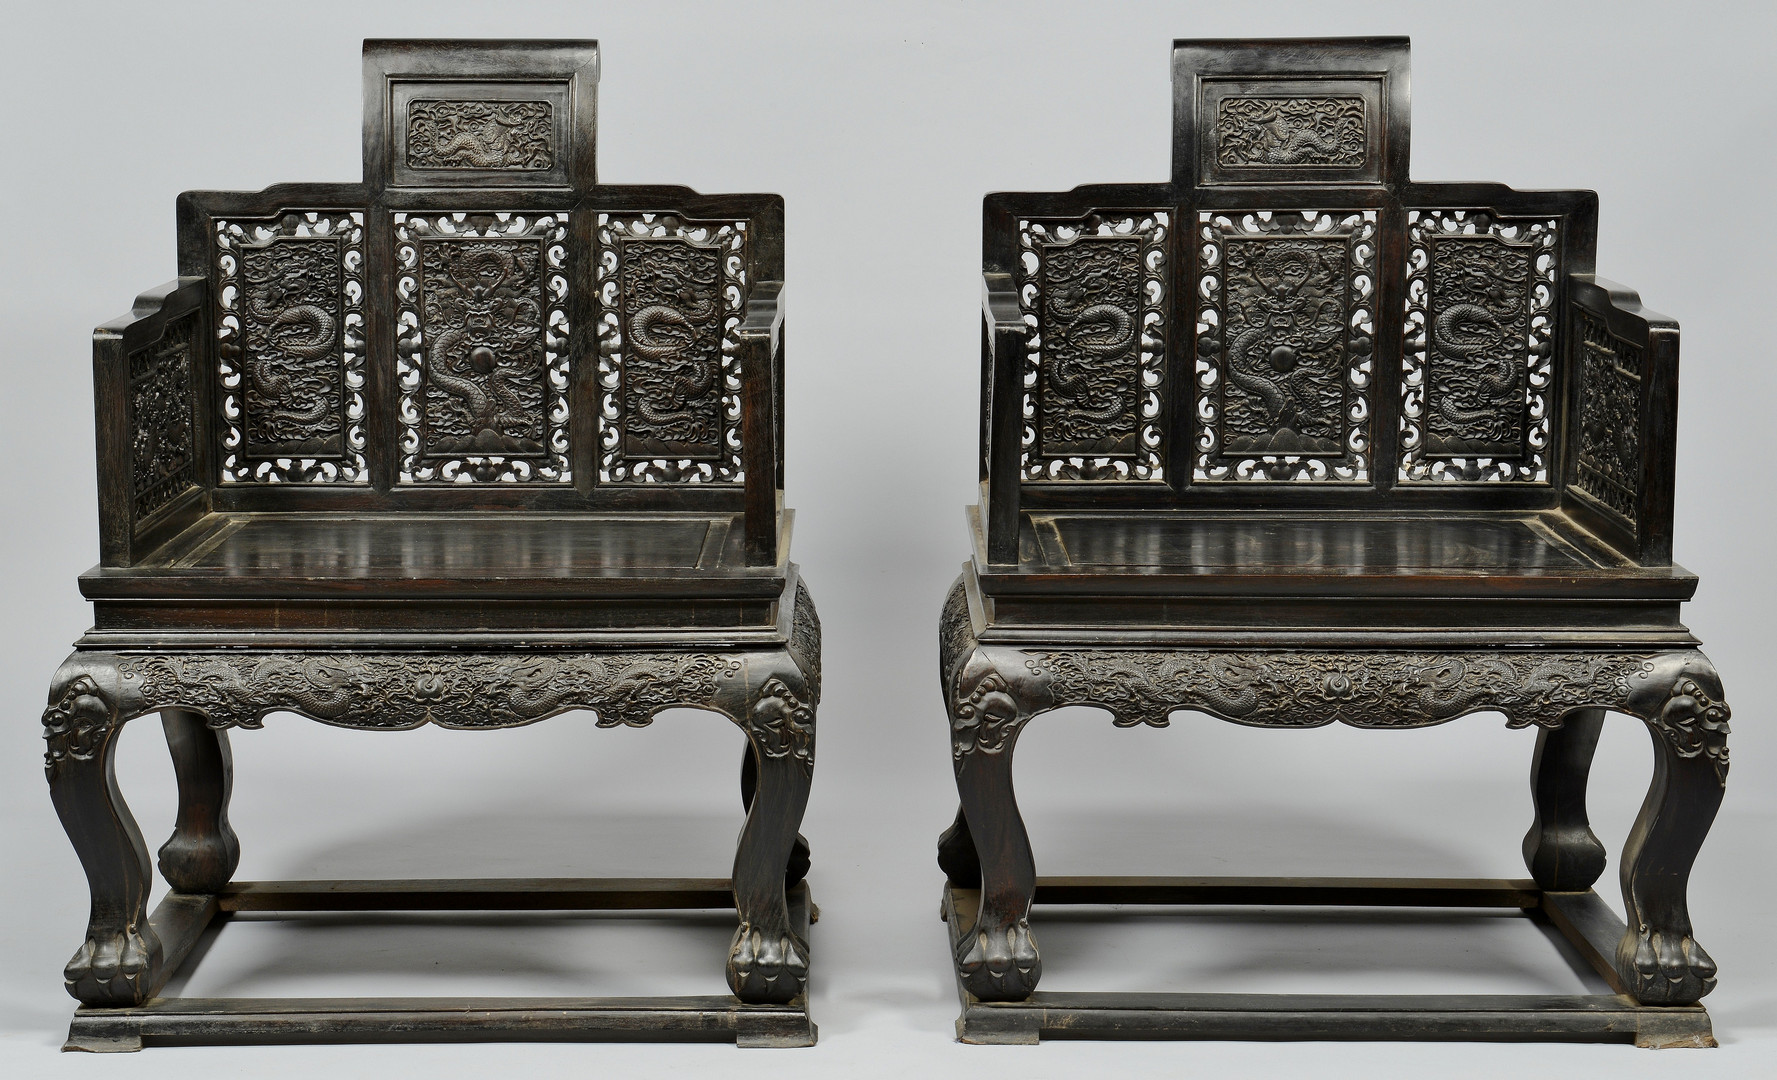 Lot 32: Pair of Chinese Hardwood Throne Form Armchairs, Modern